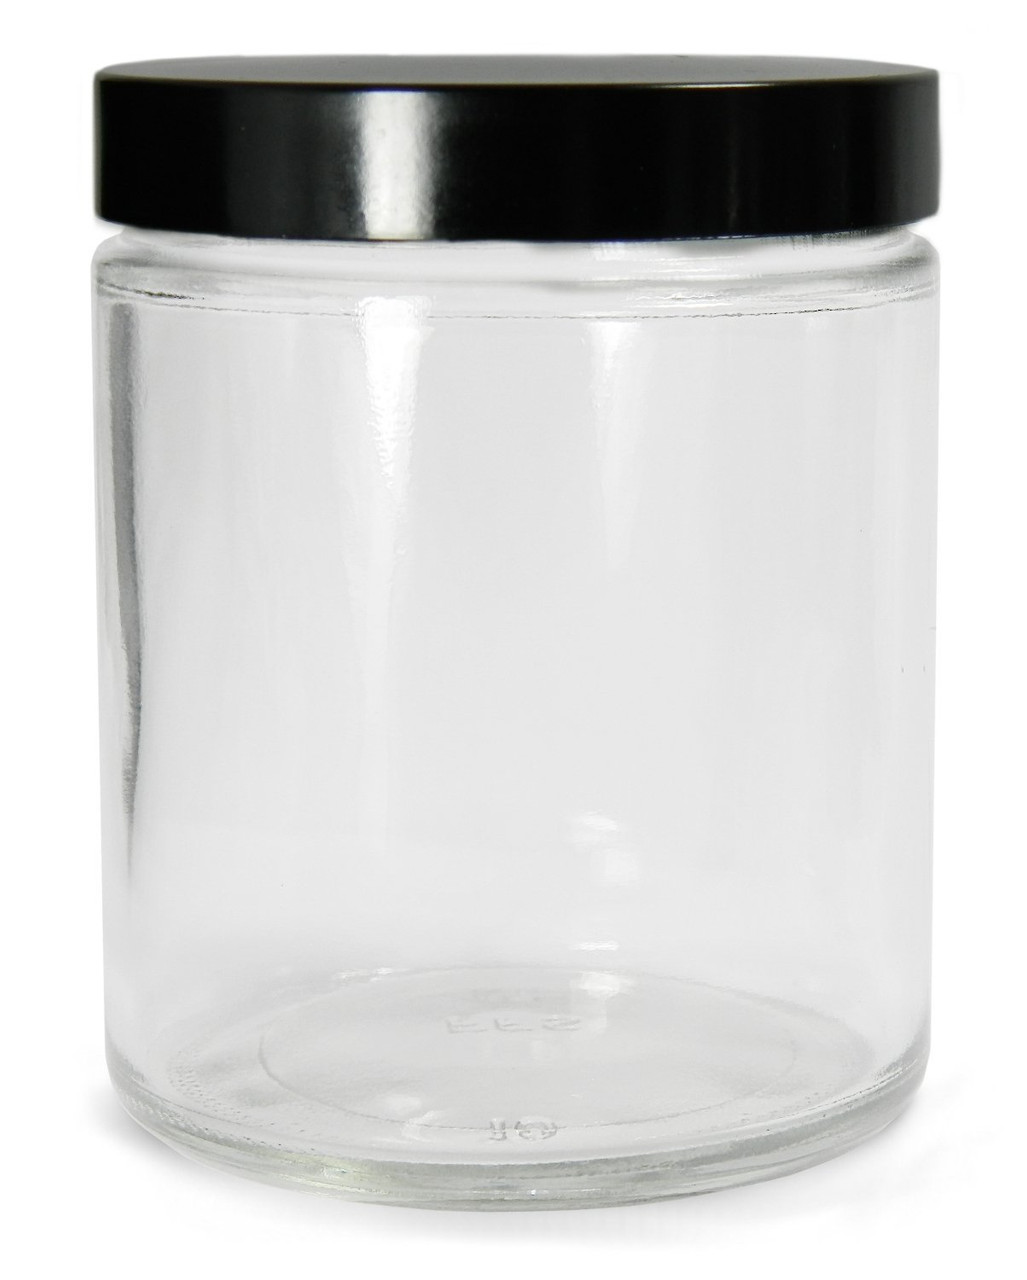 https://cdn11.bigcommerce.com/s-48gxyyxkag/images/stencil/1280x1280/products/34399/66970/qorpak-clear-glass-straight-sided-round-jars-with-black-phenolic-pulp-vinyl-lined-cap__49515.1660332713.jpg?c=1